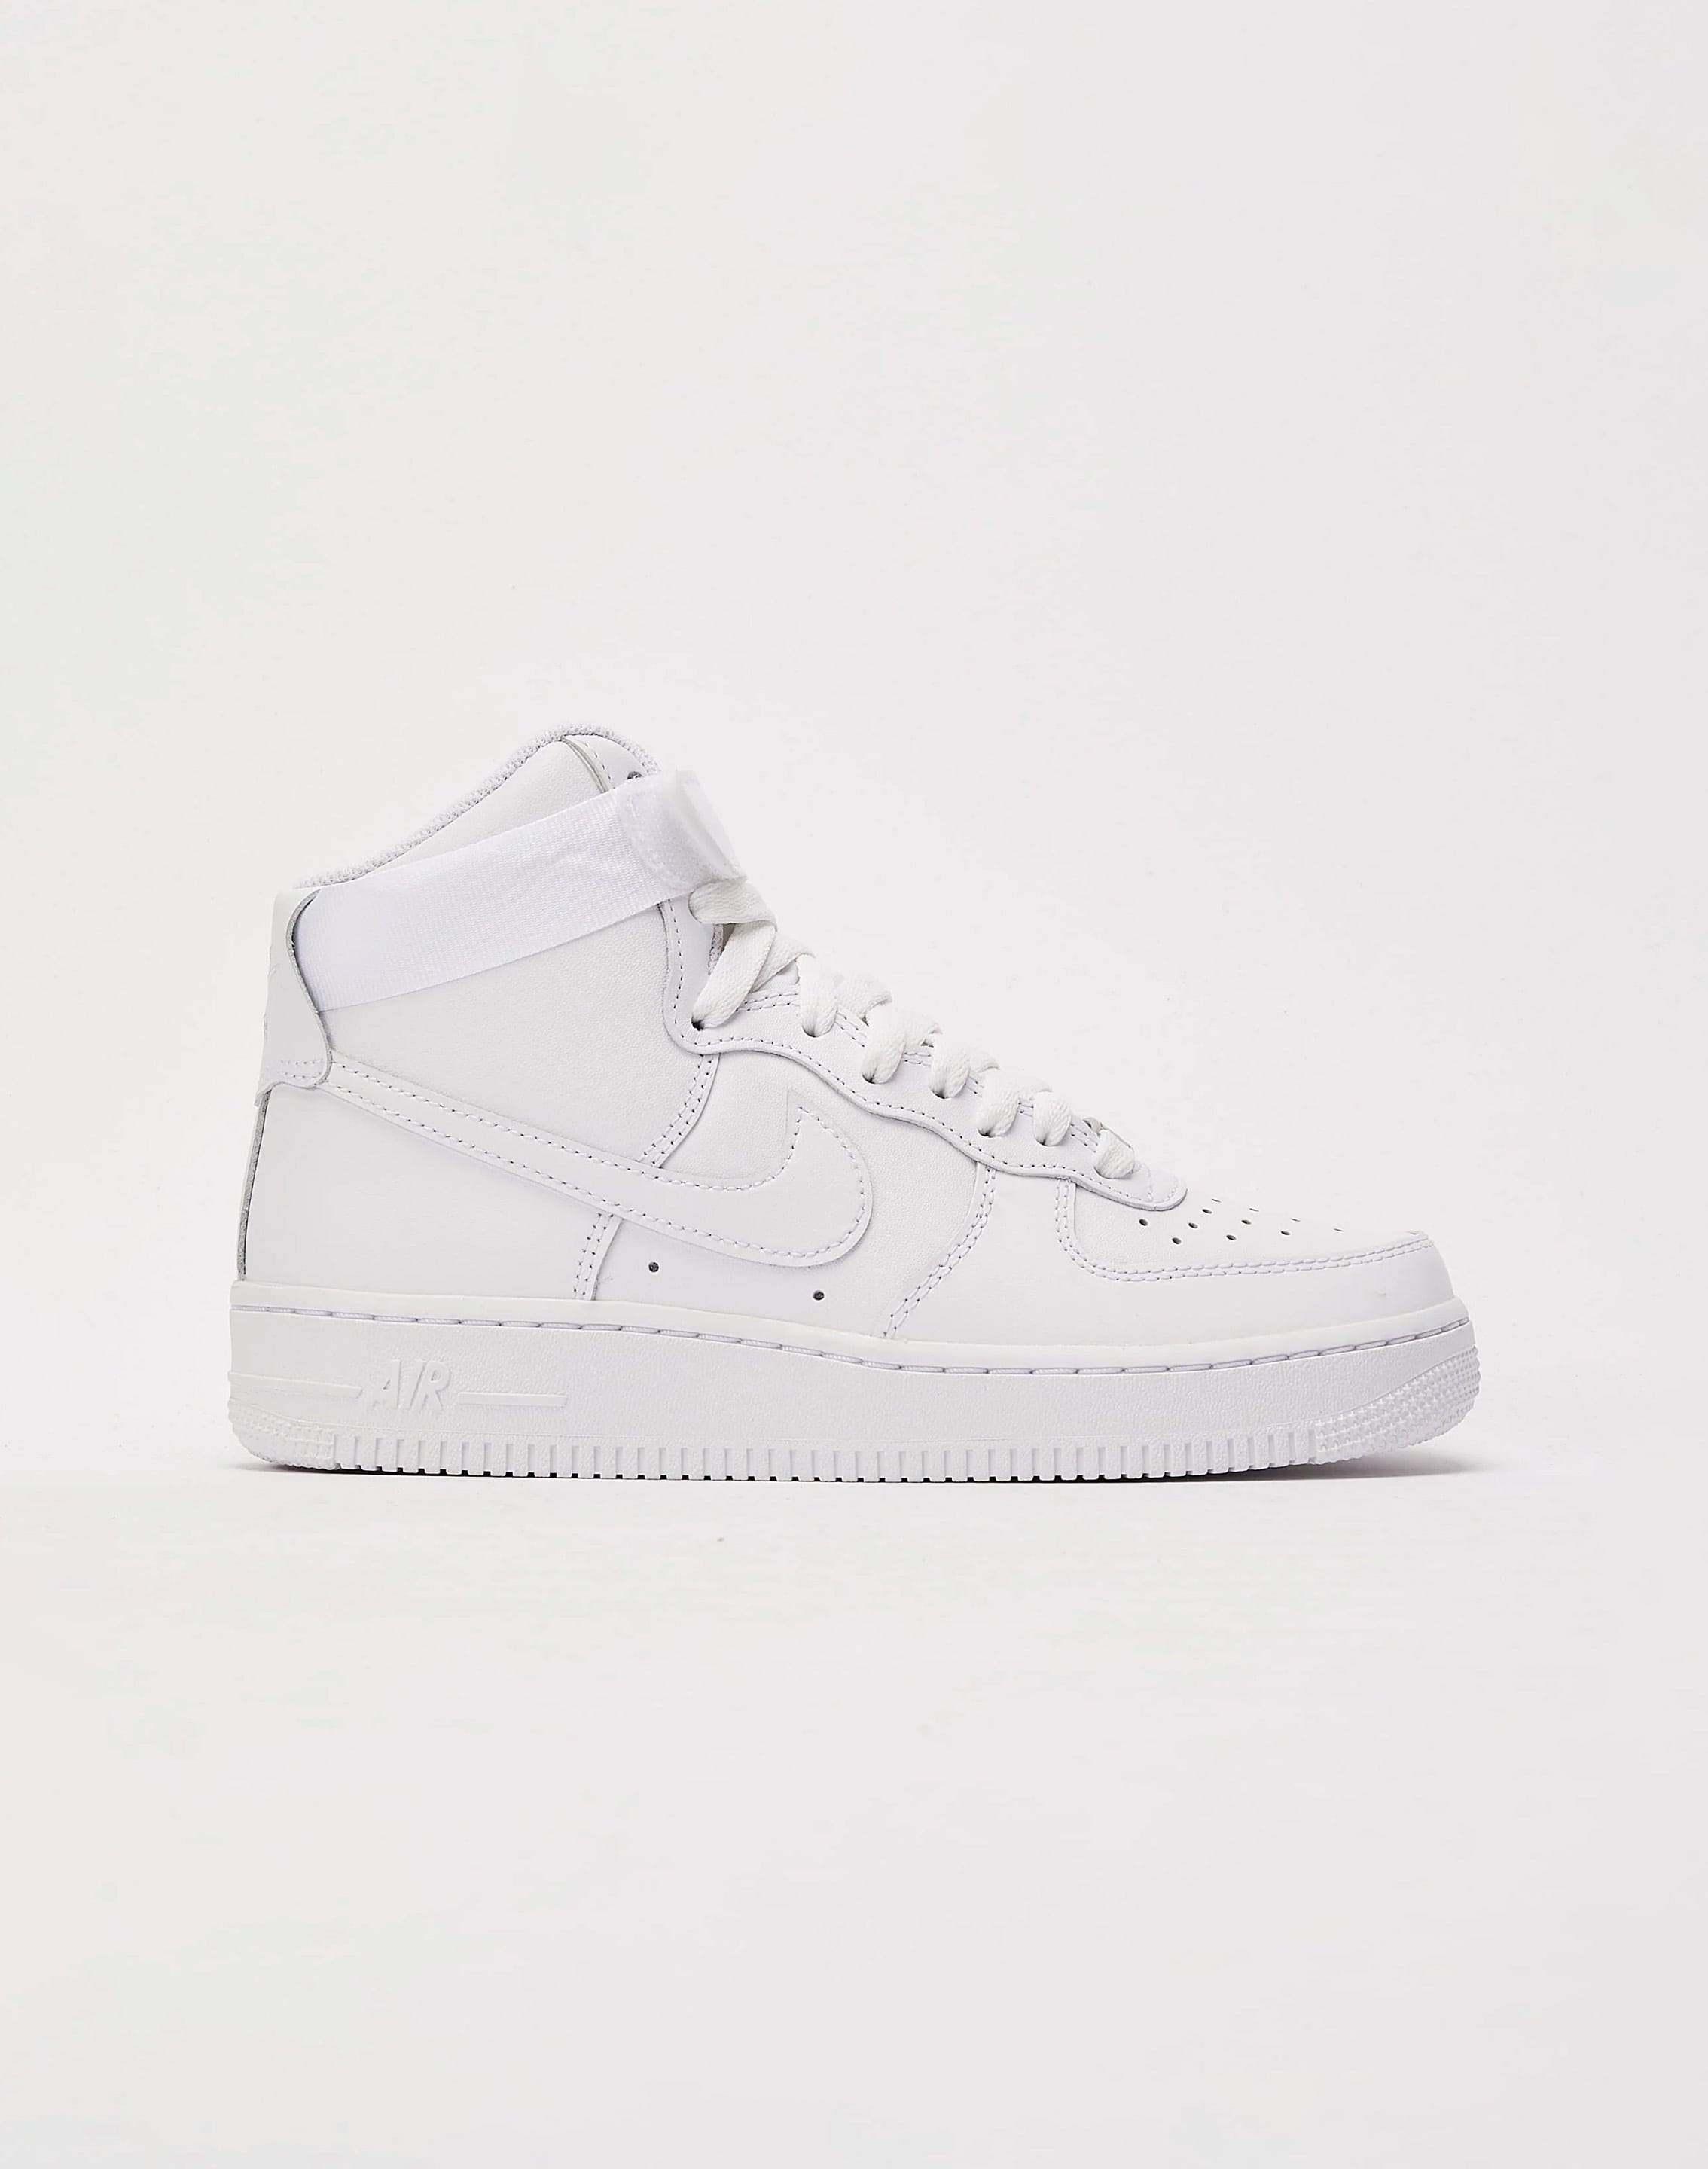 white air force ones in store near me